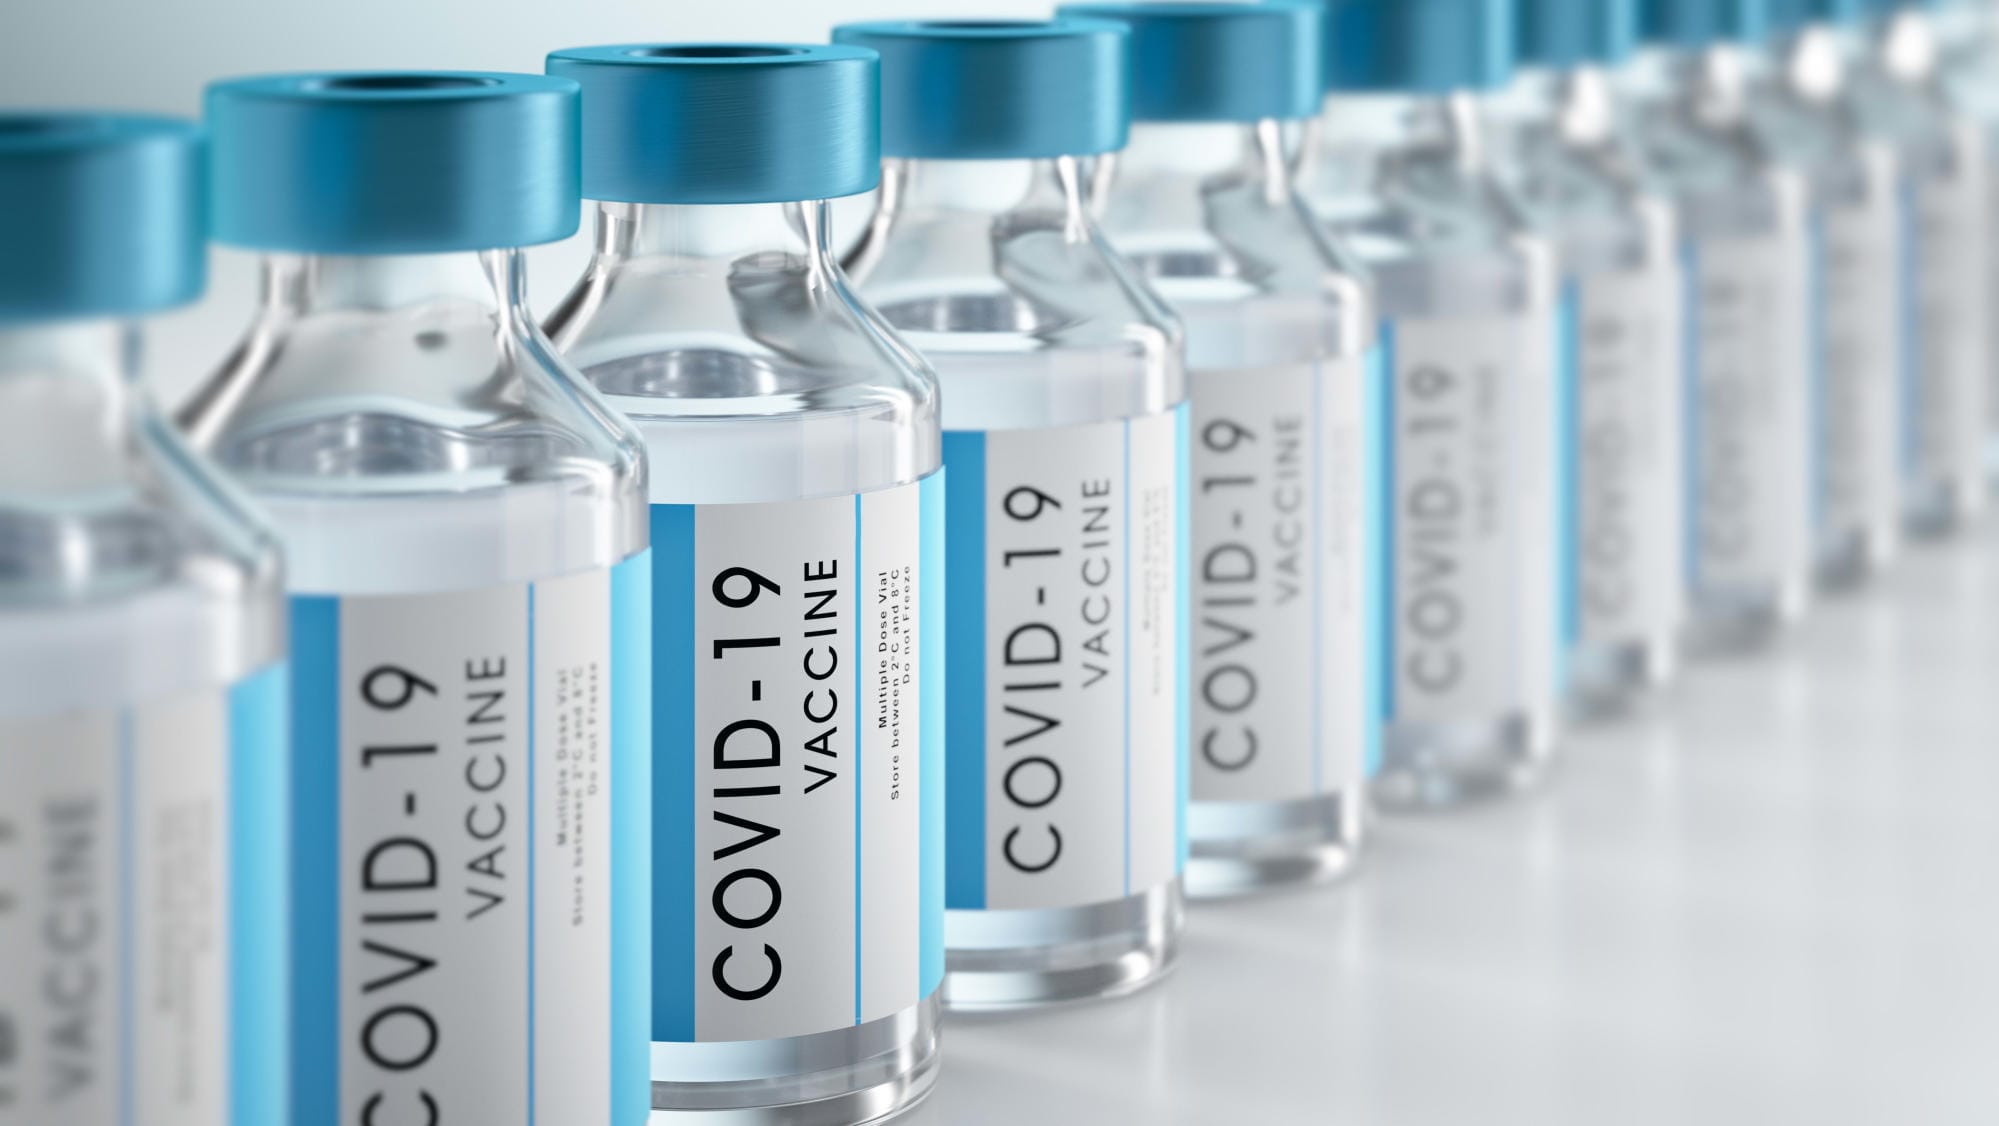 Booster Shots and Third Vaccines of Covid-19: Everything You Should Know